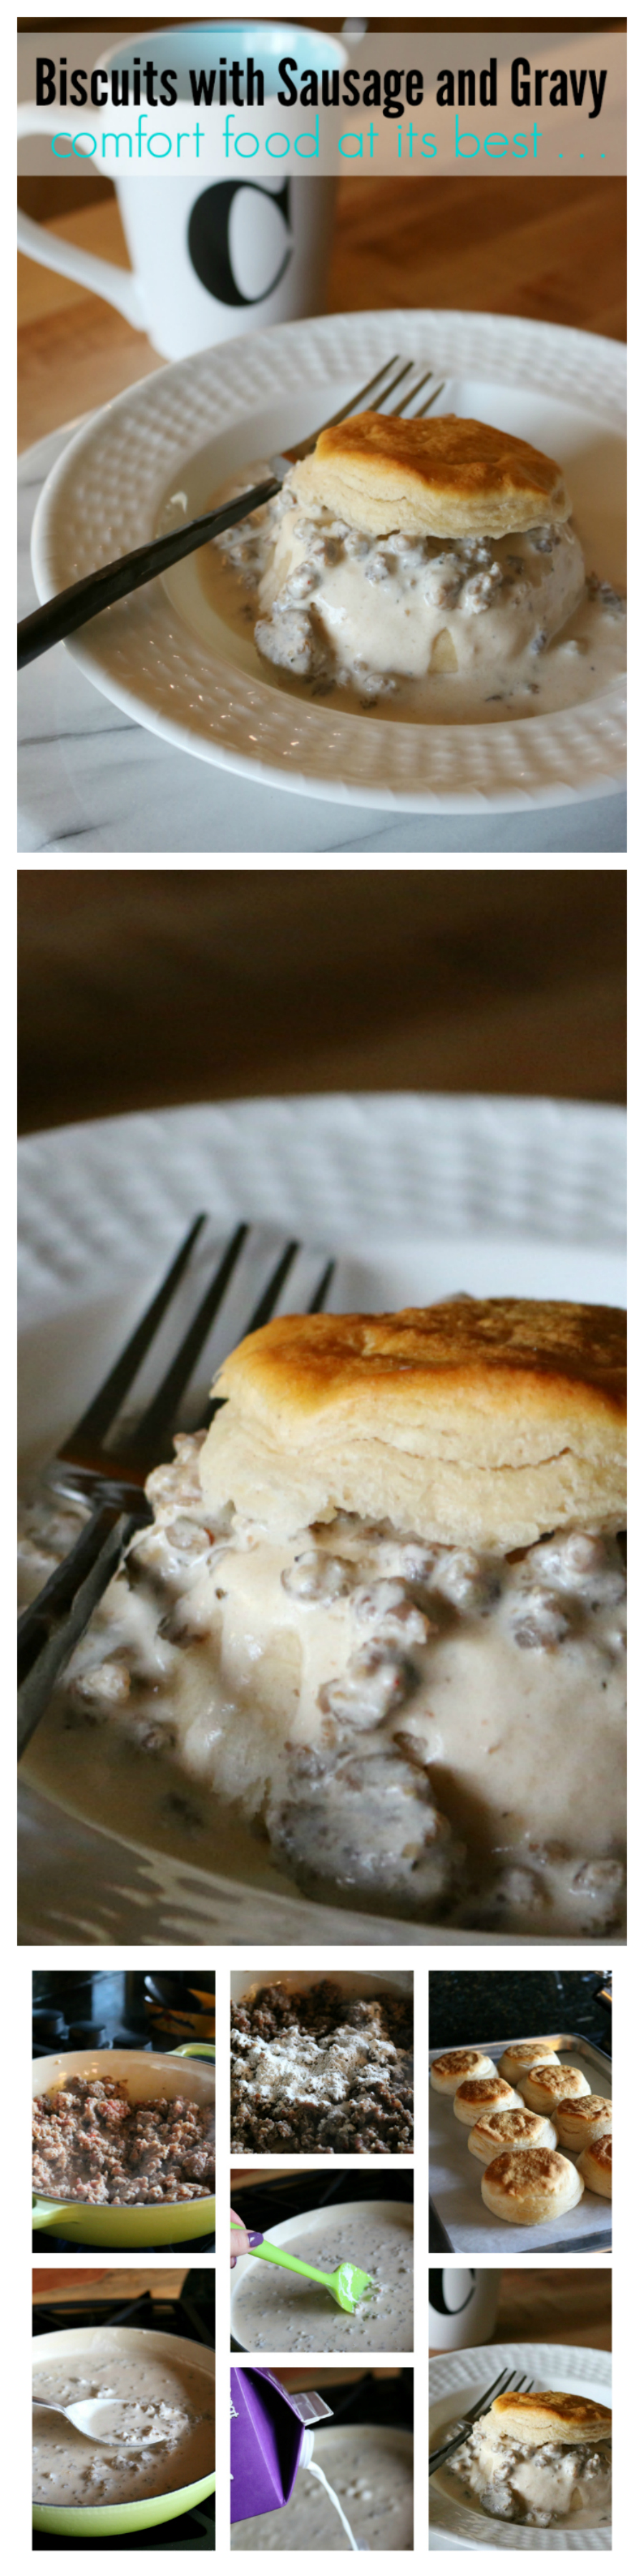 Biscuits and Sausage Gravy - Comfort Food for Breakfast  CeceliasGoodStuff.com | Good Food for Good People 